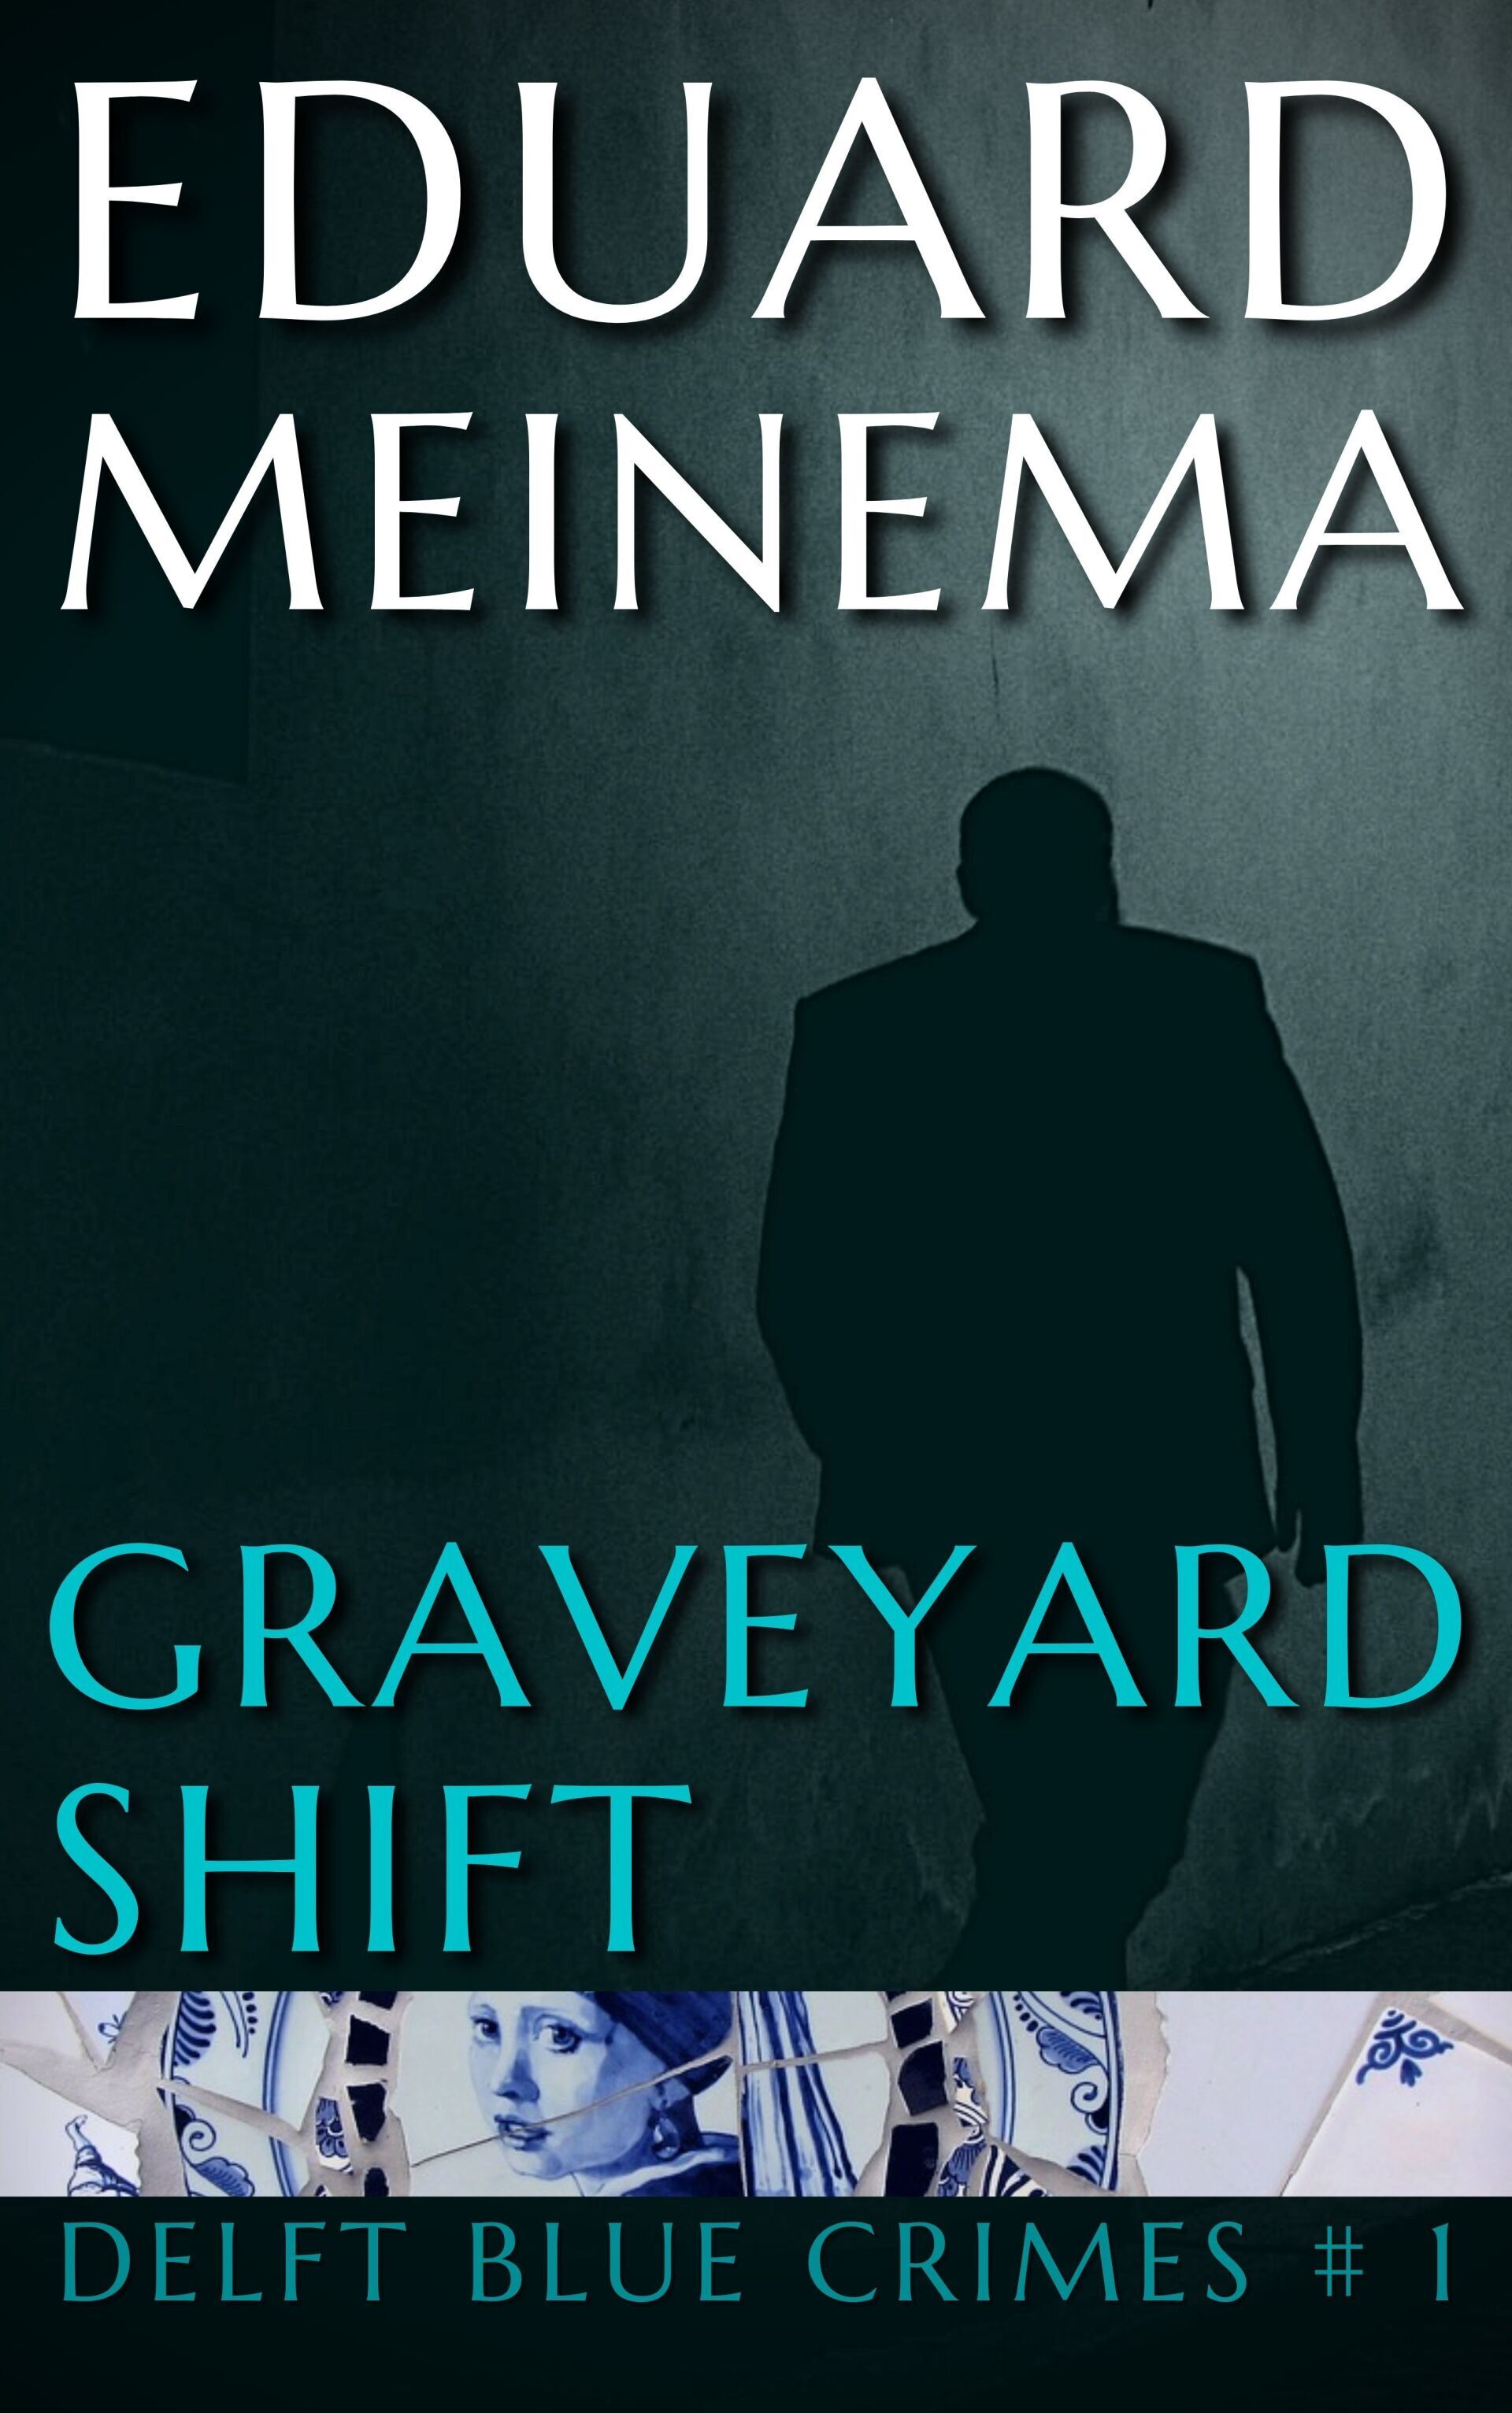 Delft Blue Crimes #1 Graveyard Shift by Eduard Meinema. Buy ebook now, directly from the author.